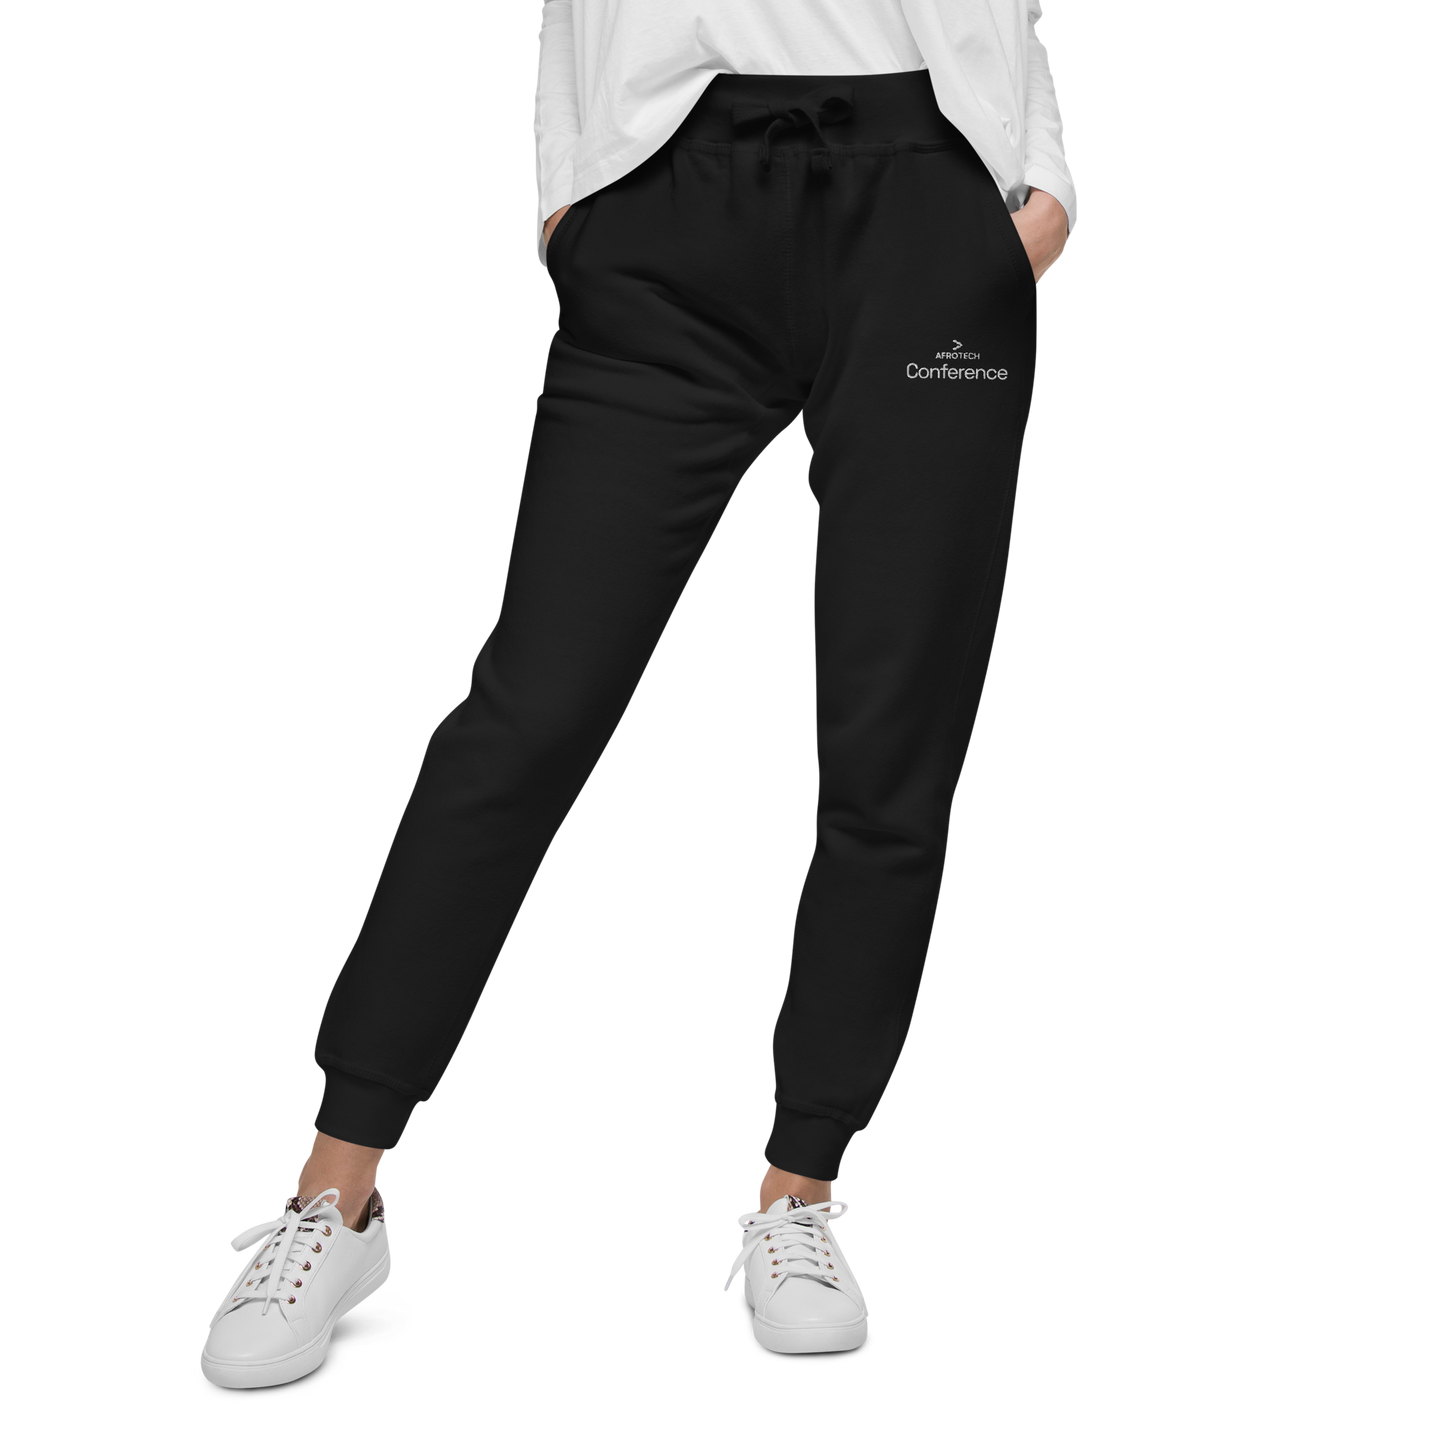 AFROTECH Conference sweatpants